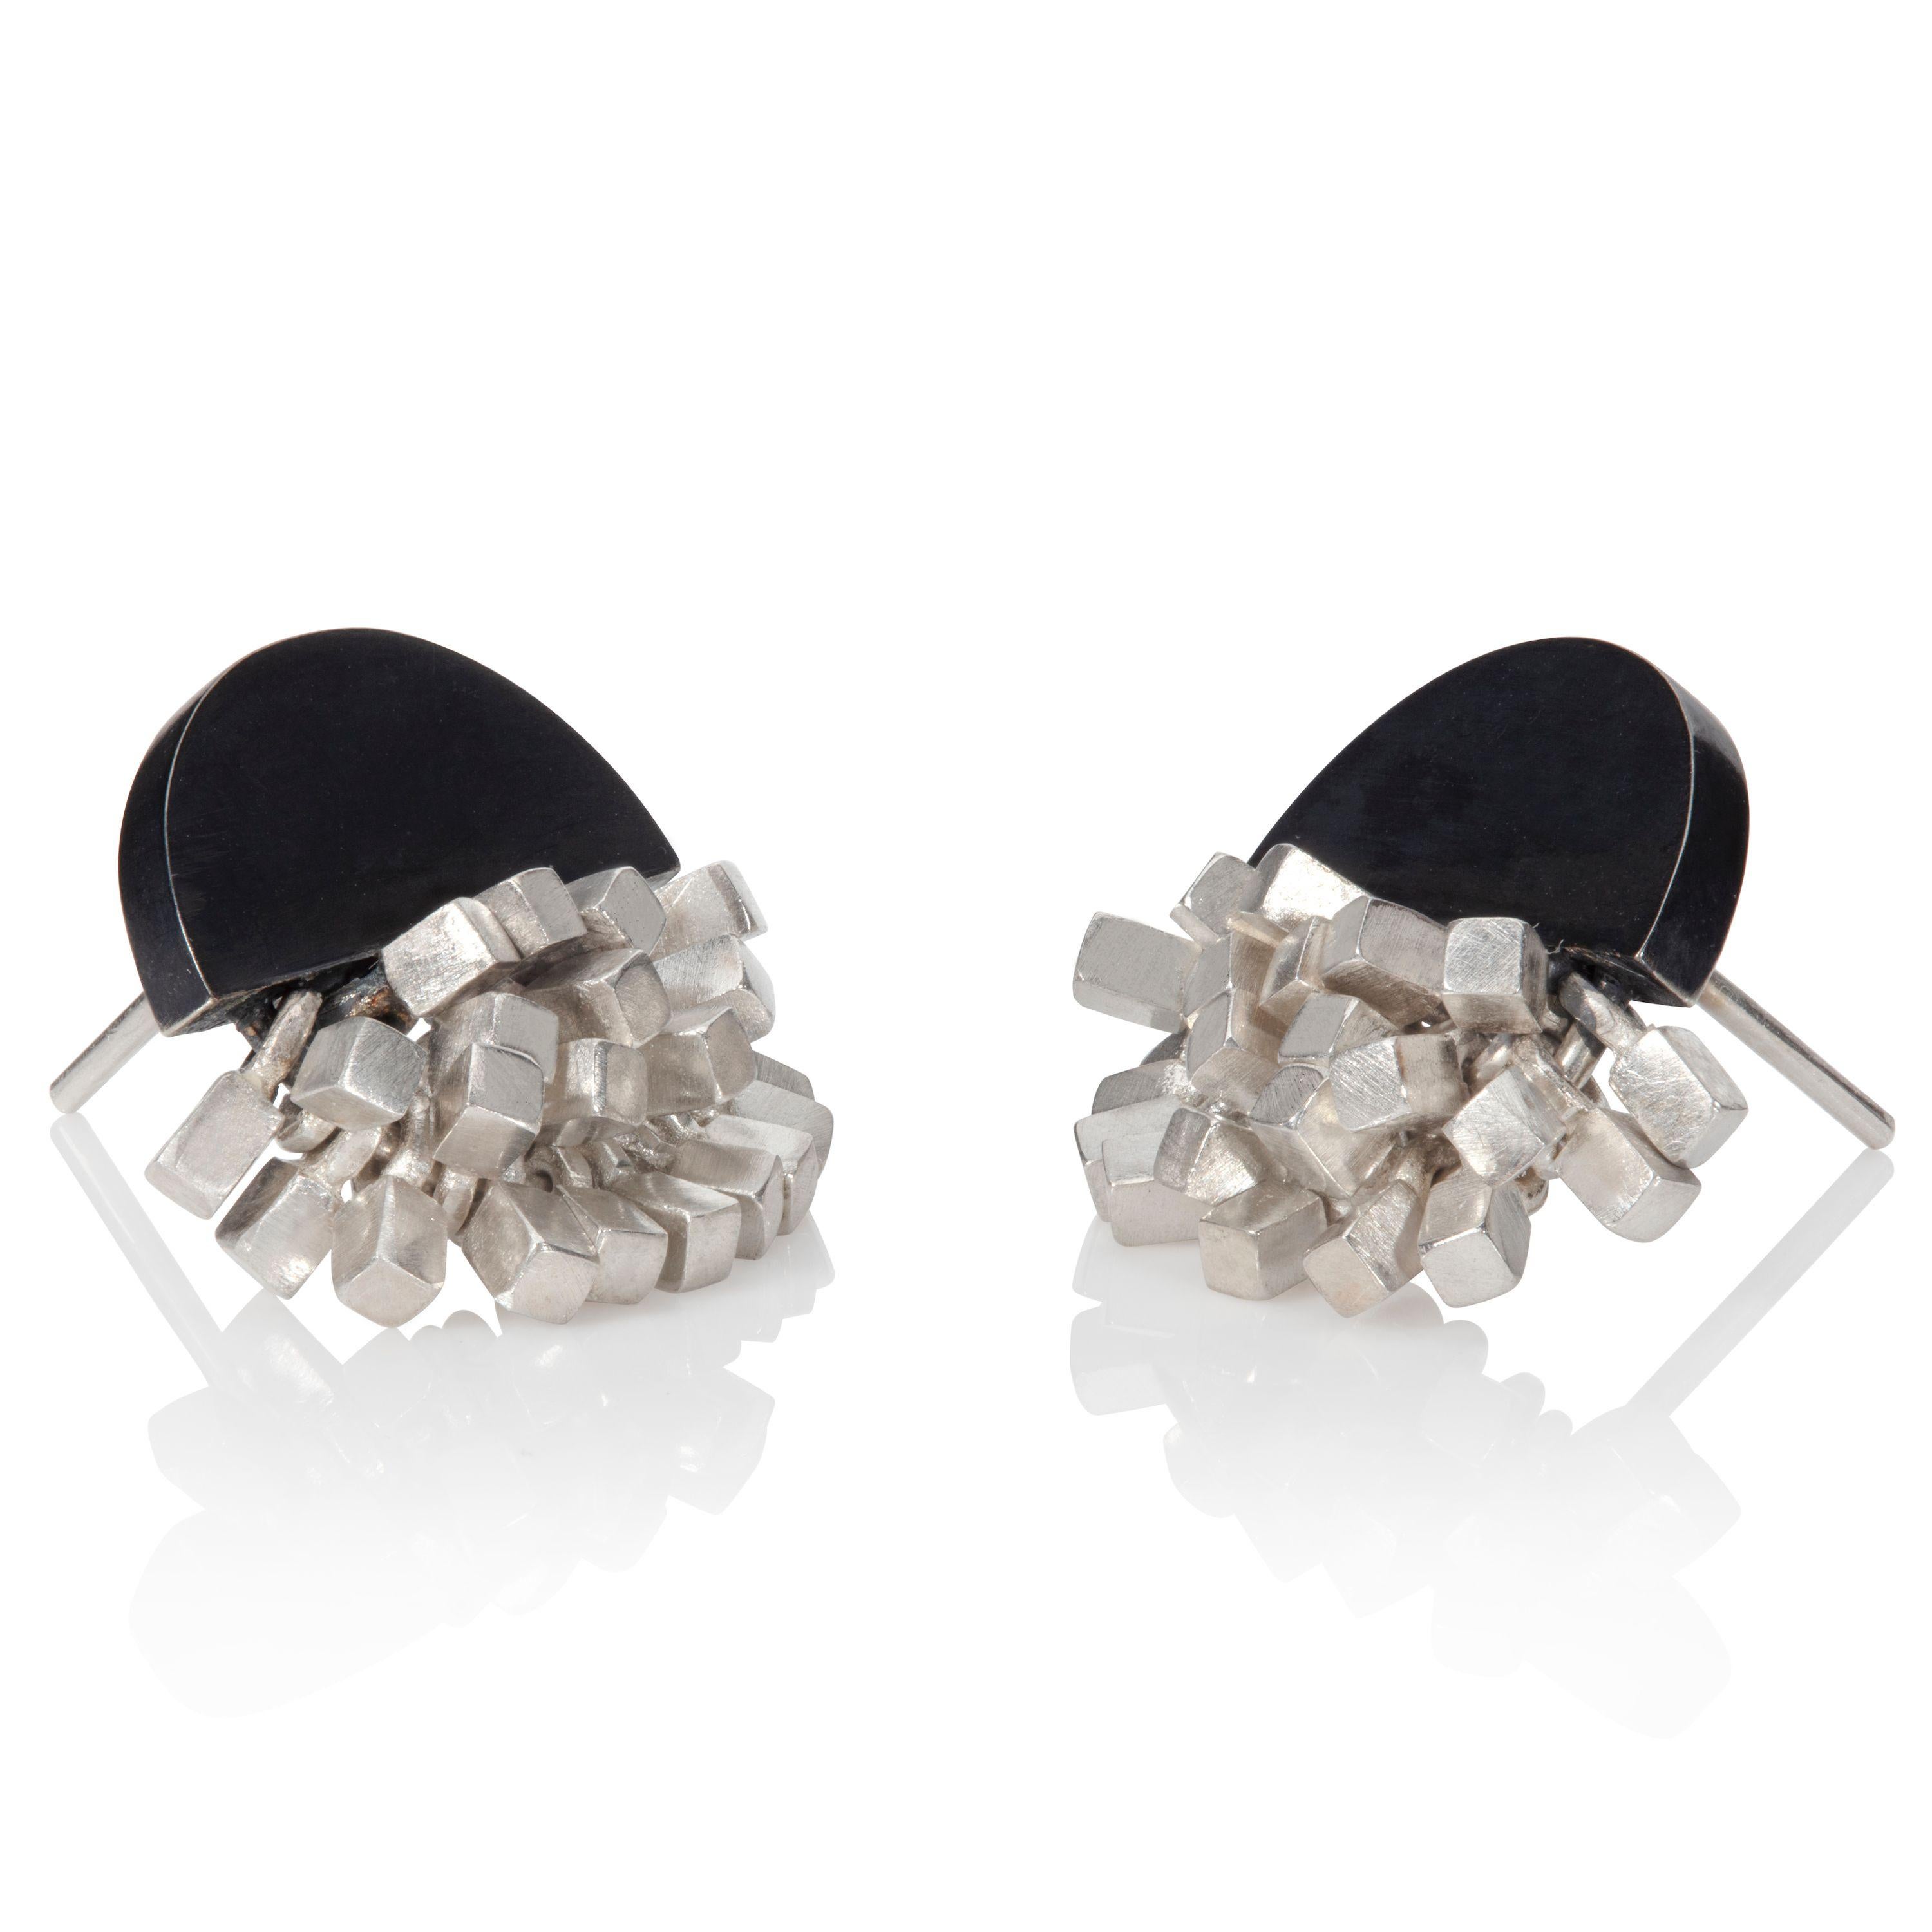 These earrings are designed and made by UK jeweler Sarah Pulvertaft. Adorning the bottom edge of the oxidised sterling silver half-circle are many individual mini cubes in a bright sterling silver. Moveable cubes, each capturing the reflection of